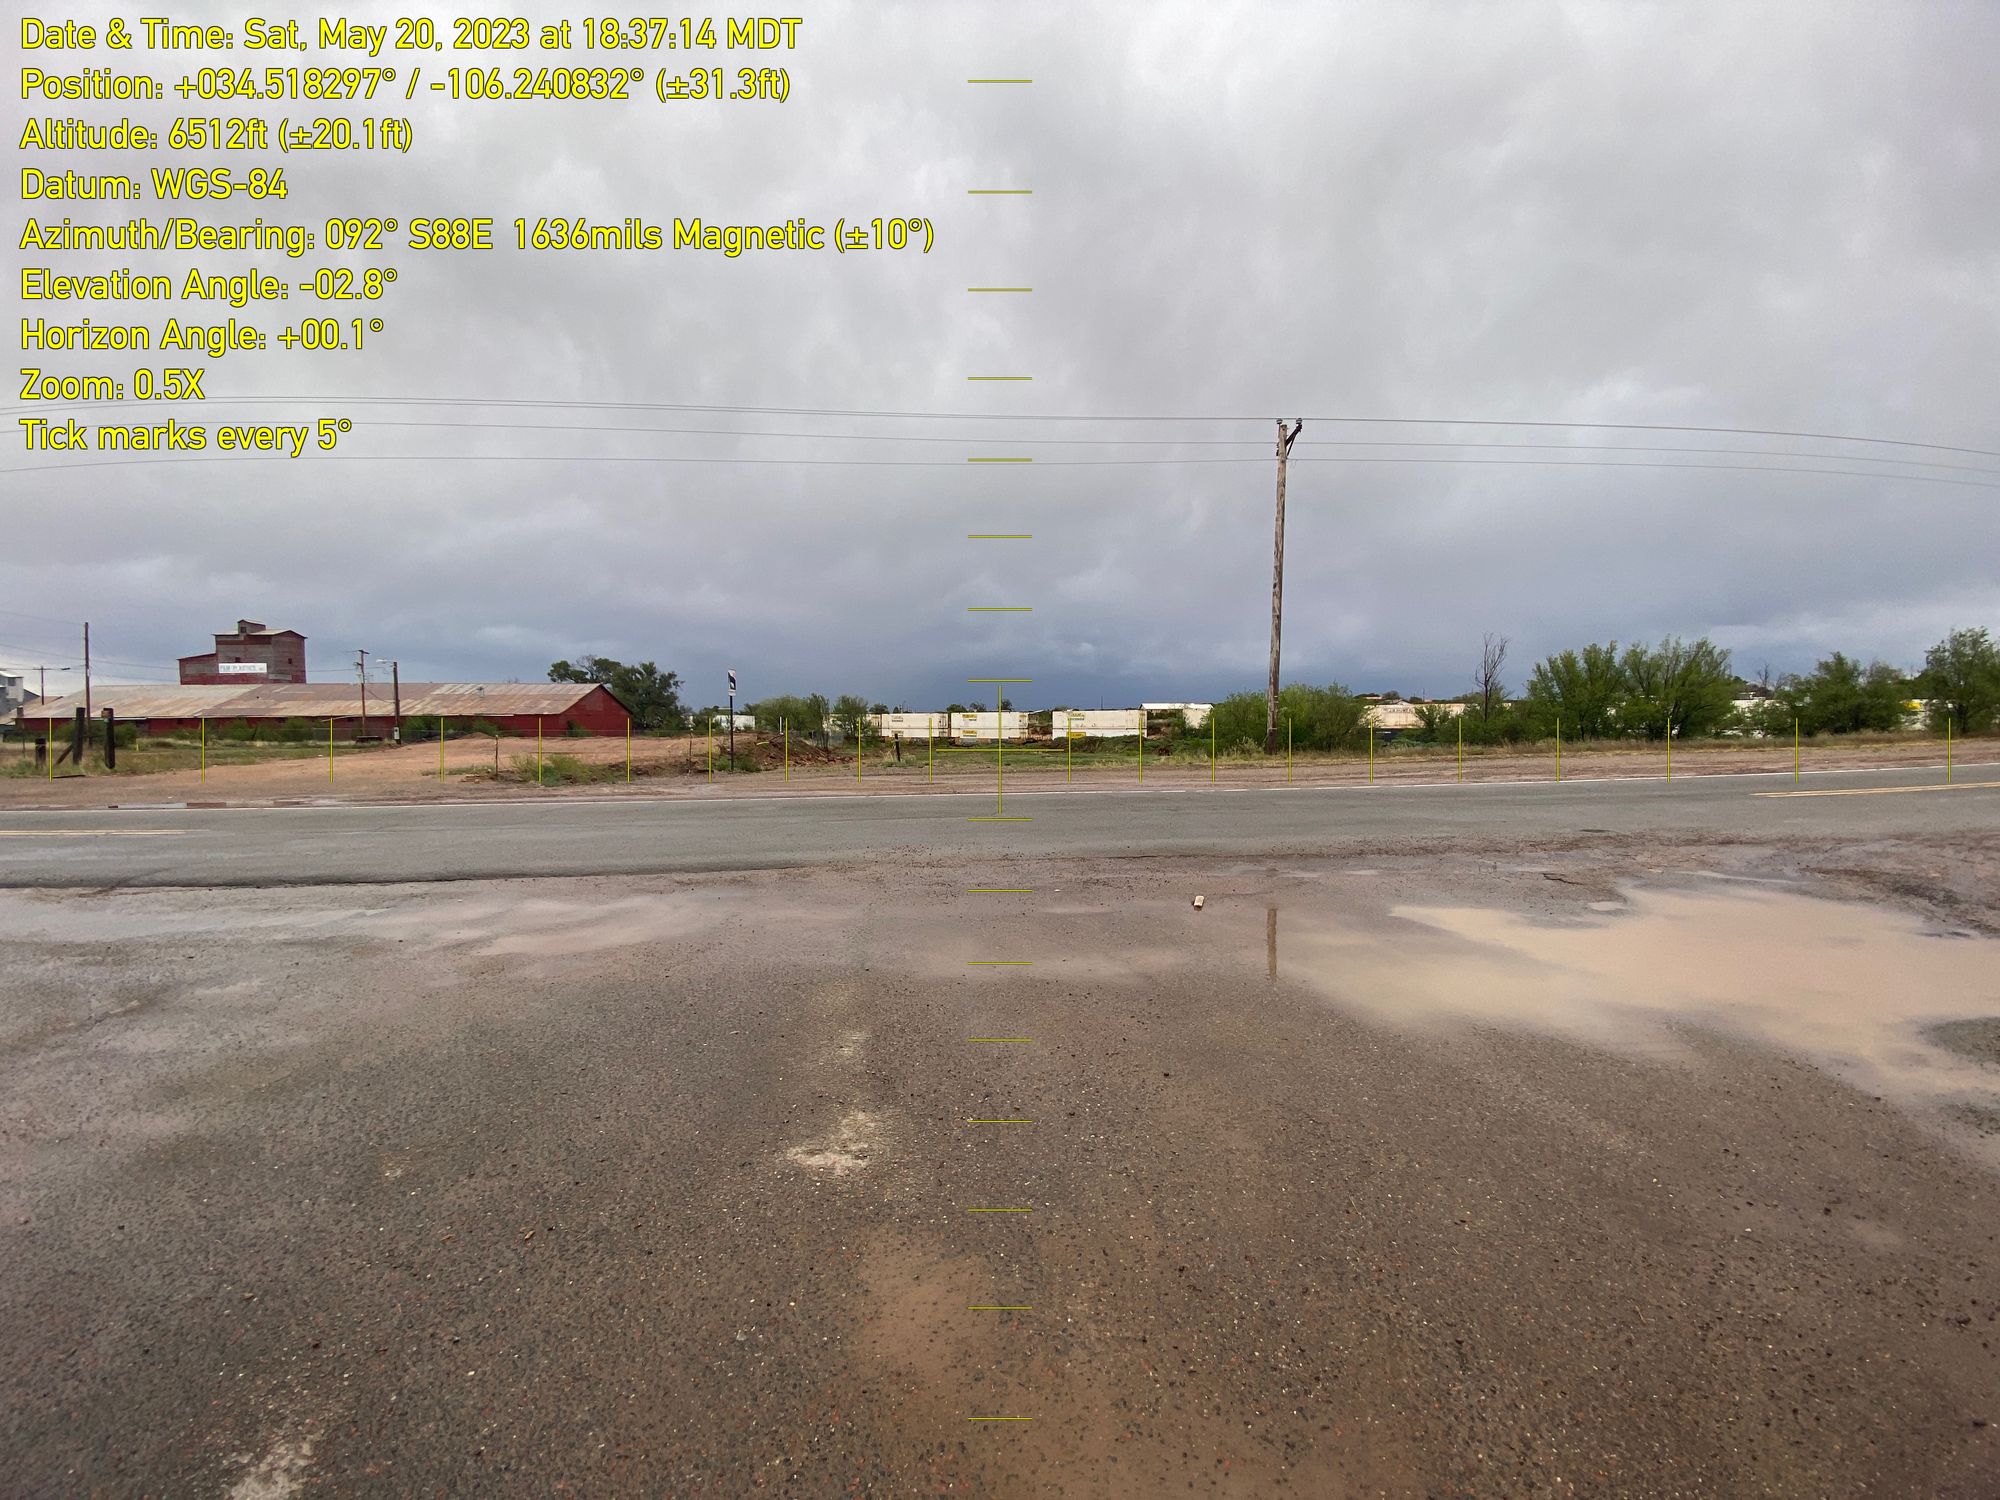 Street view of proposed area of 3rd Street for Purchase looking towards the BNSF Railroad, with a train passing in the background, and an overlay providing latitude and longitude of the location (34.518297, -106.240832), elevation (6,512 ft), and date and time of the photograph (May 20, 2023 at 18:37 MDT). 